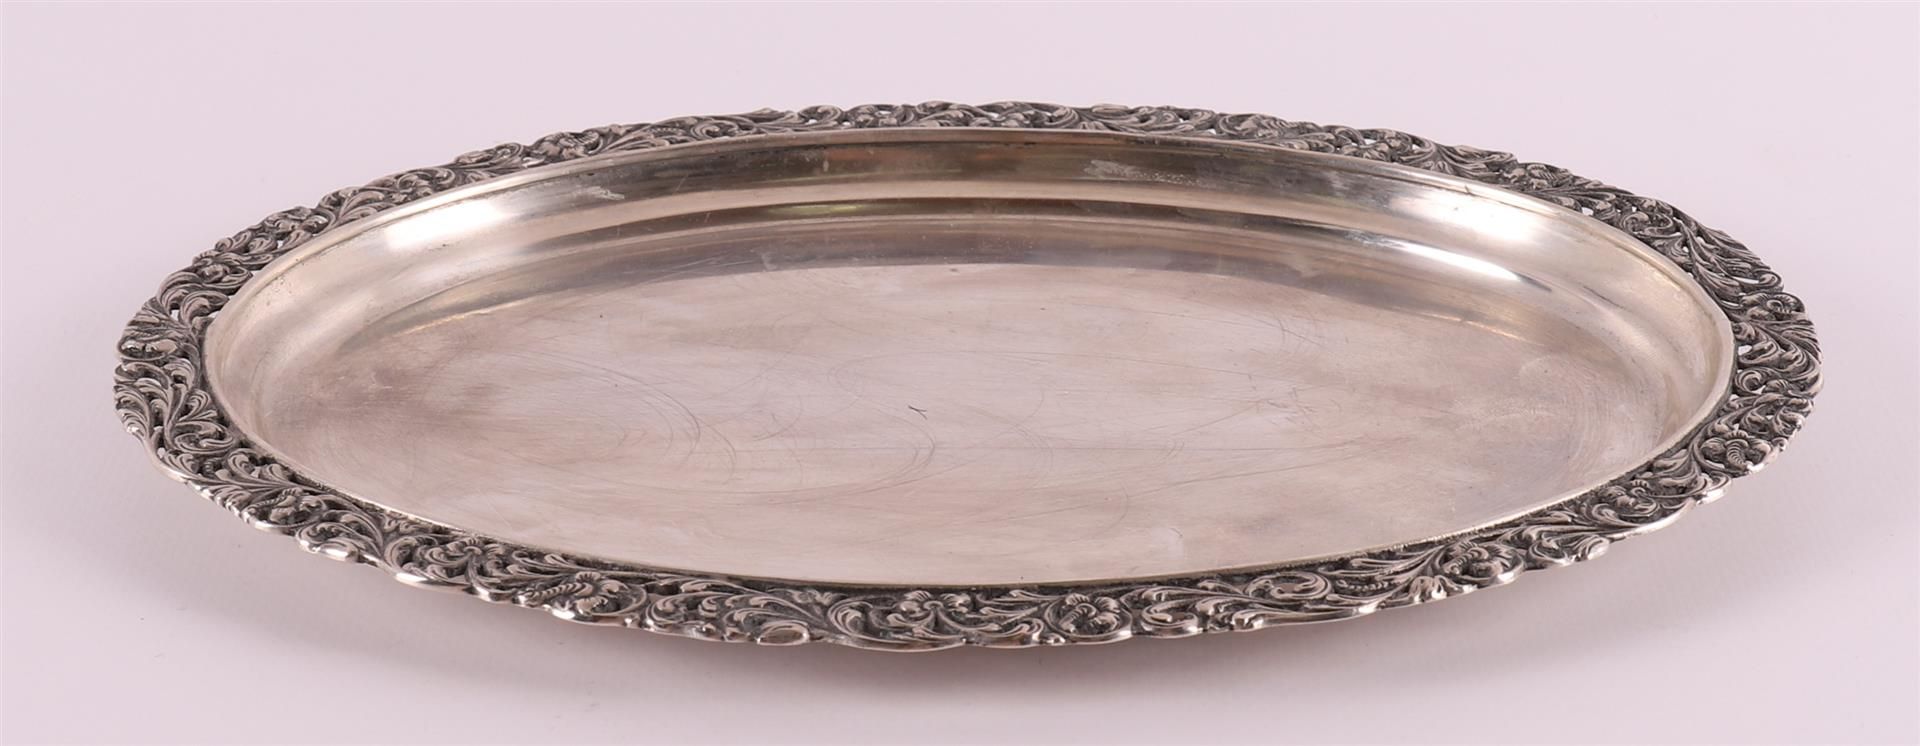 An oval second grade 835/1000 silver platter with floral openwork edge, year letter 1947, 254 grams,